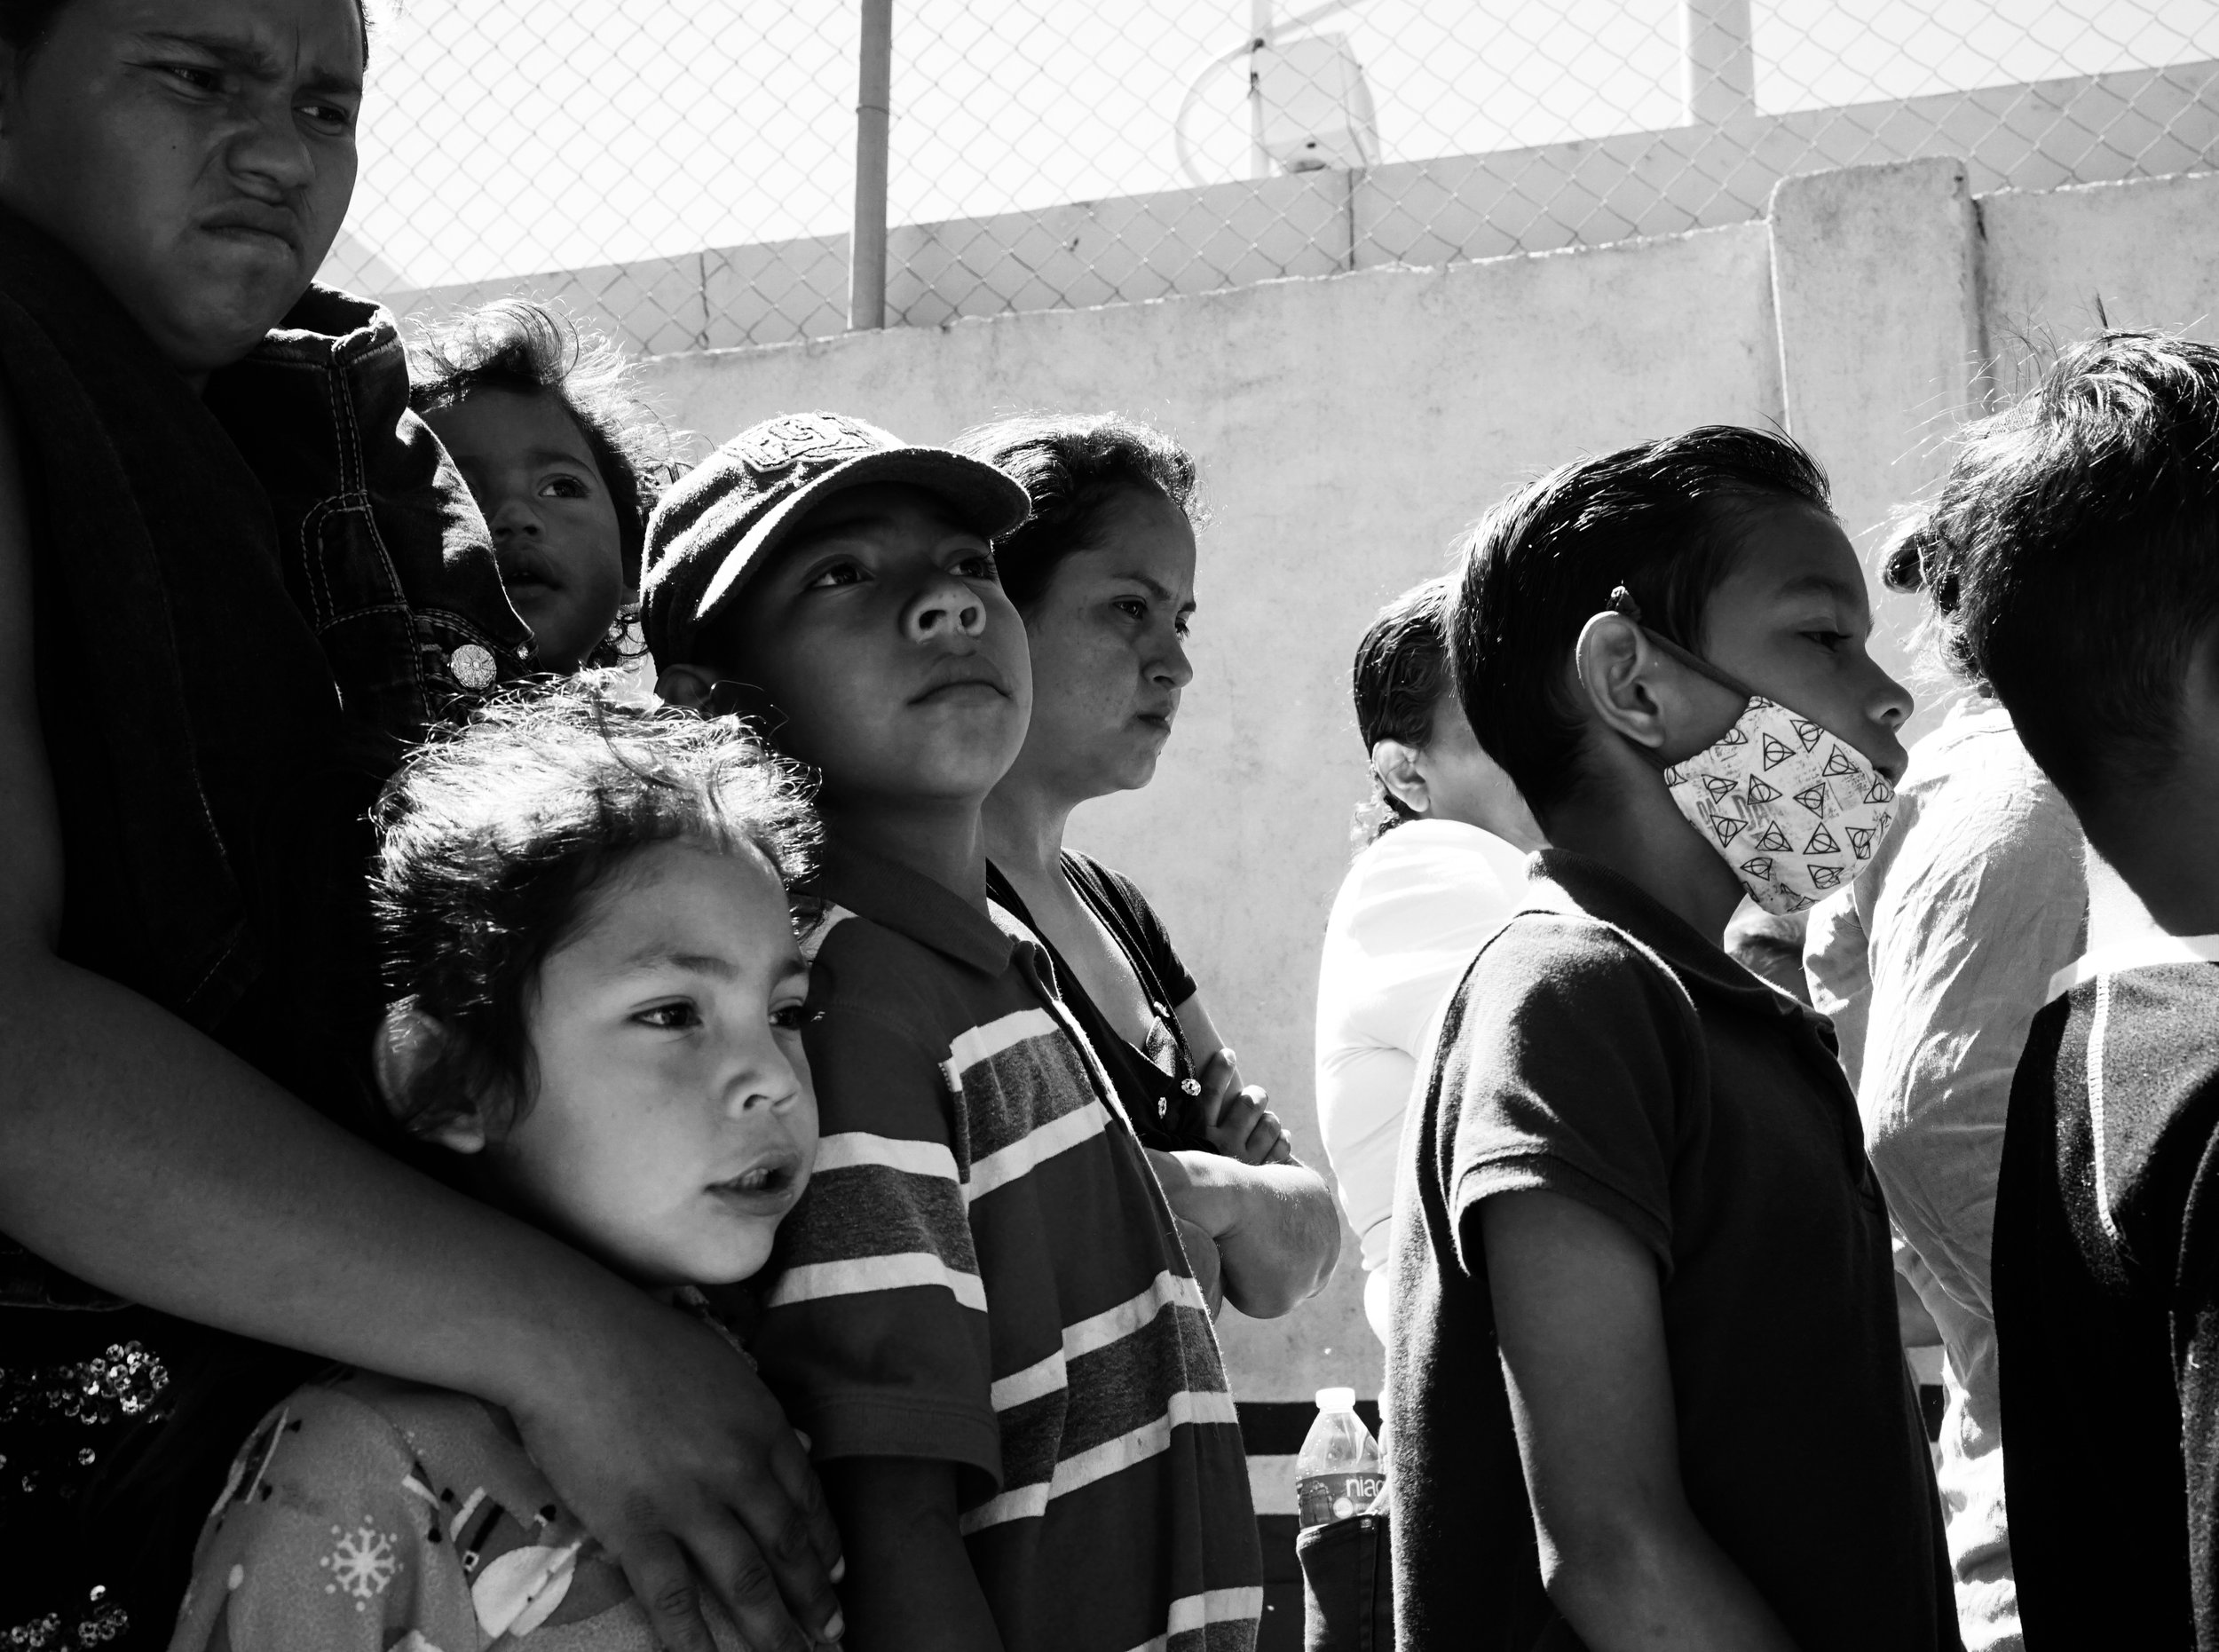  Children wait in line for food at El Chaparral in Tijuana, Mexico. 